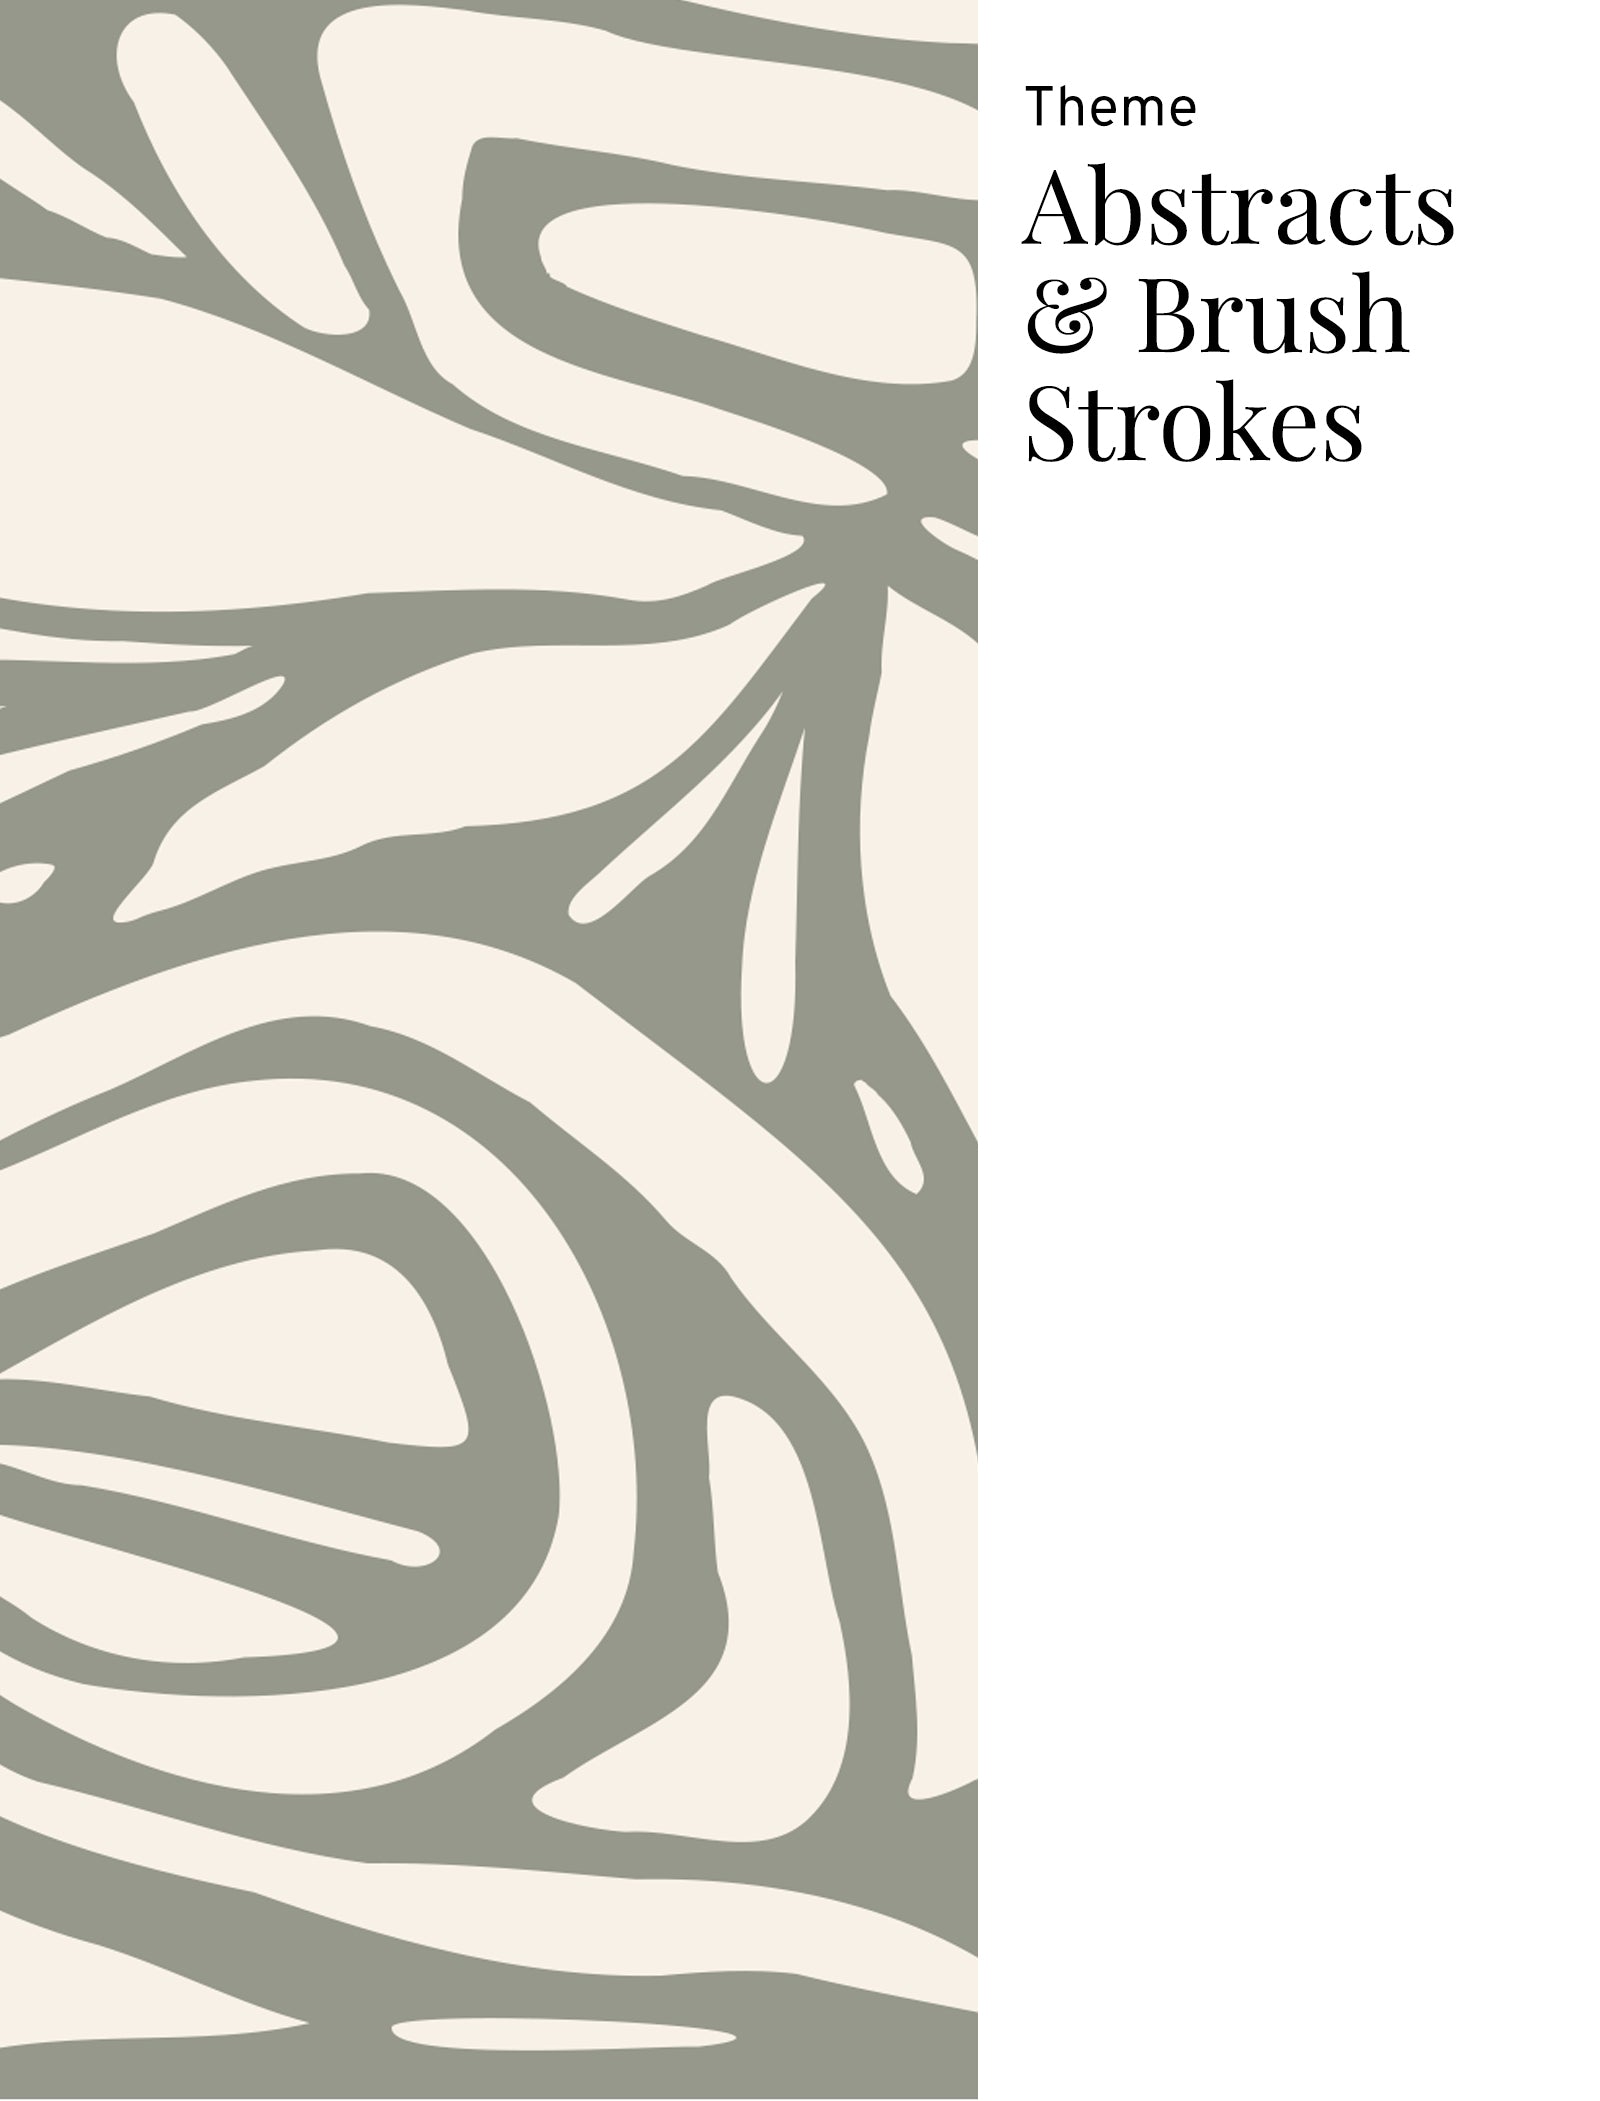 Abstracts & Brush Strokes